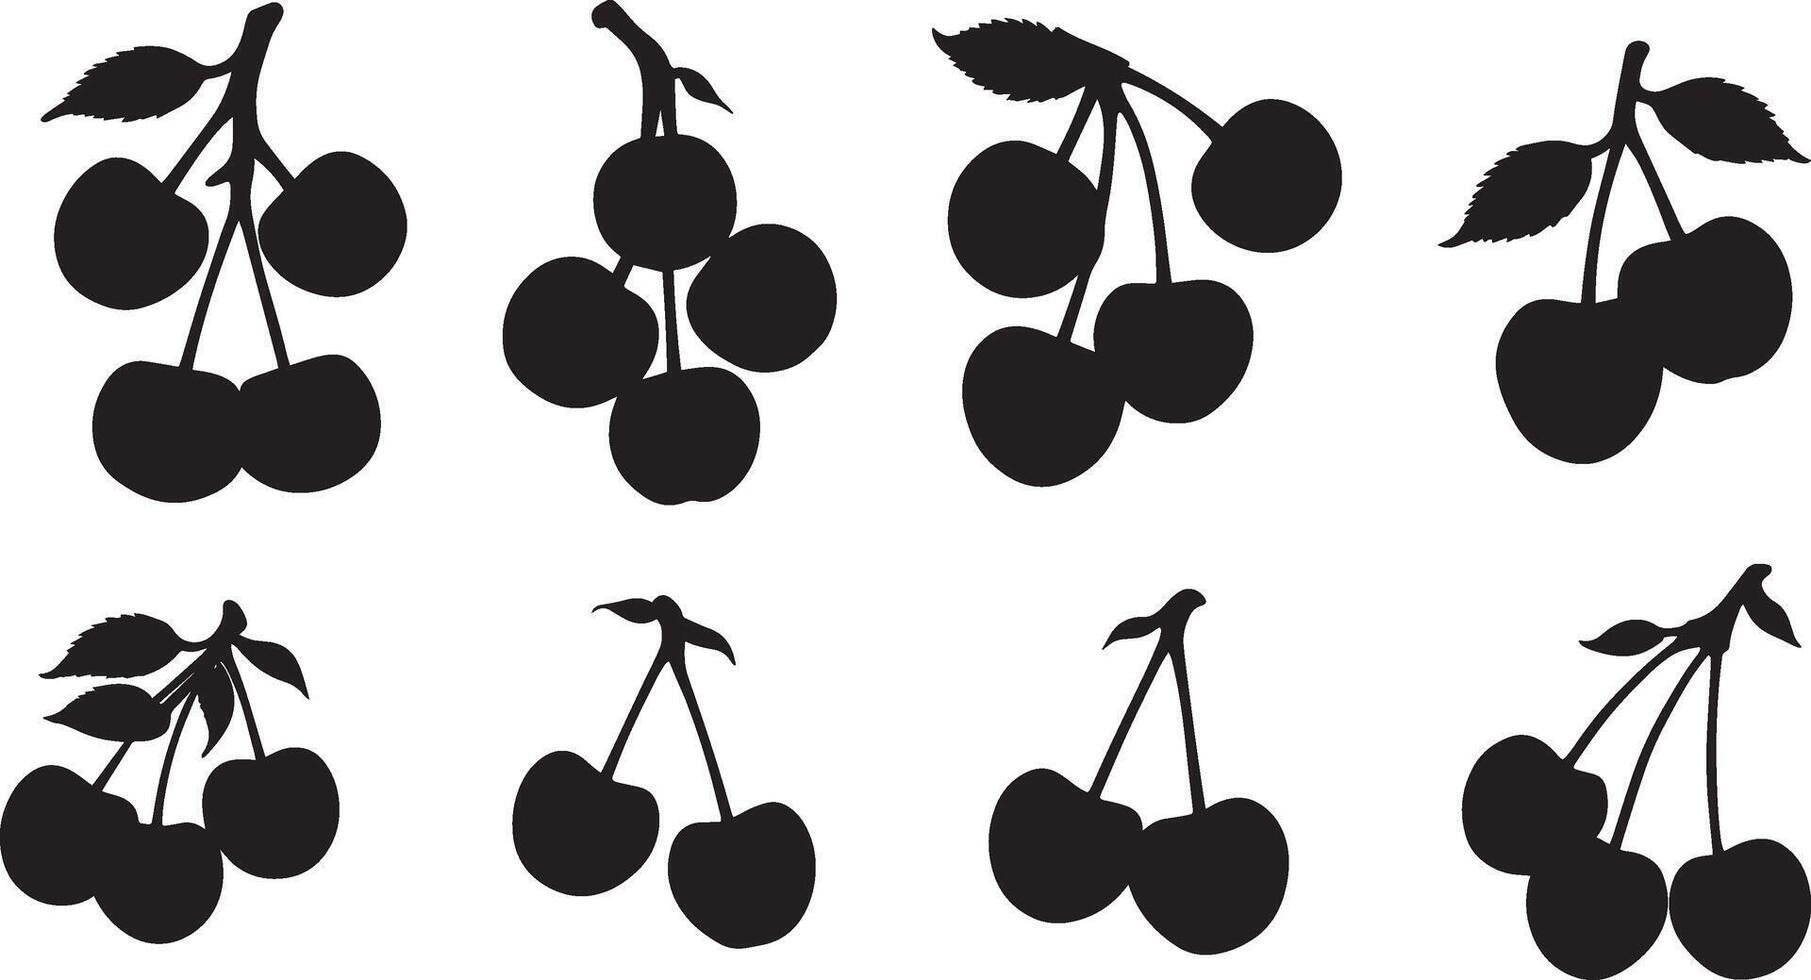 Cherry leaves and branches silhouette stencil image vector